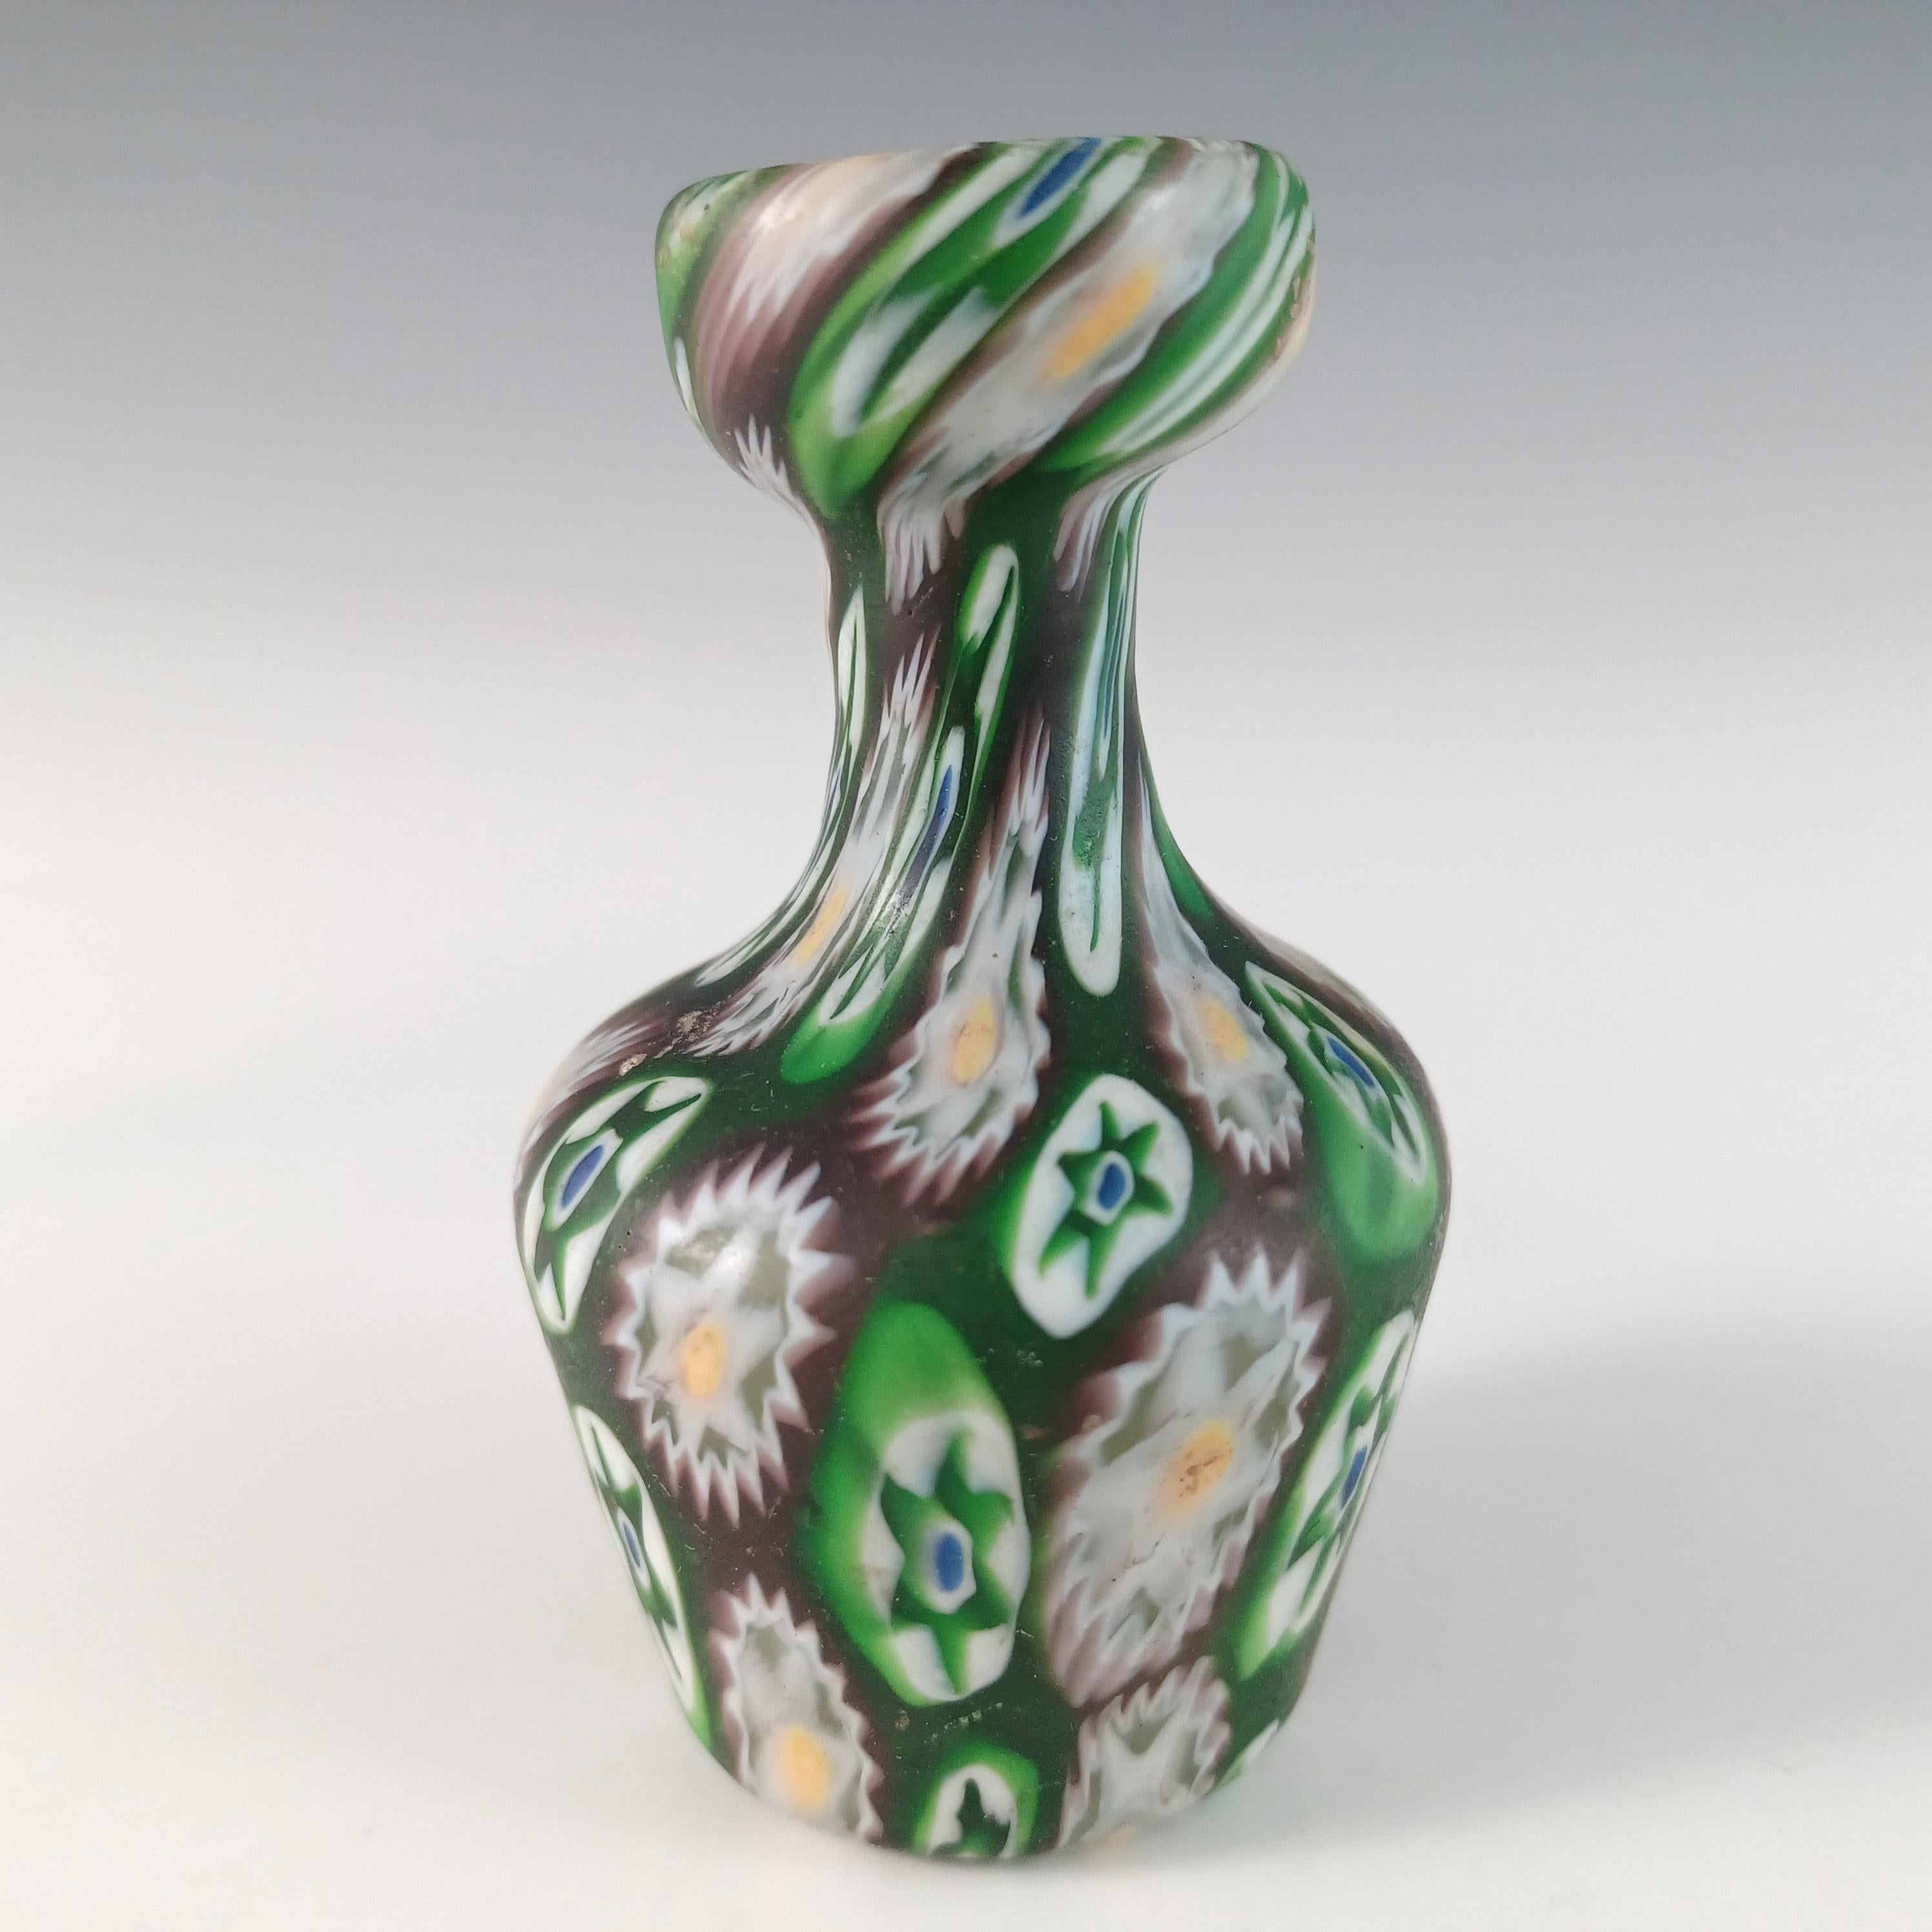 This is a magnificent Venetian glass miniature vase, circa 1900 - 1914, made on the island of Murano, near Venice, Italy. Made by Fratelli Toso, similar items are shown in the book 'Venetian Glass - Confections in Glass 1855 - 1914' by Sheldon Barr,